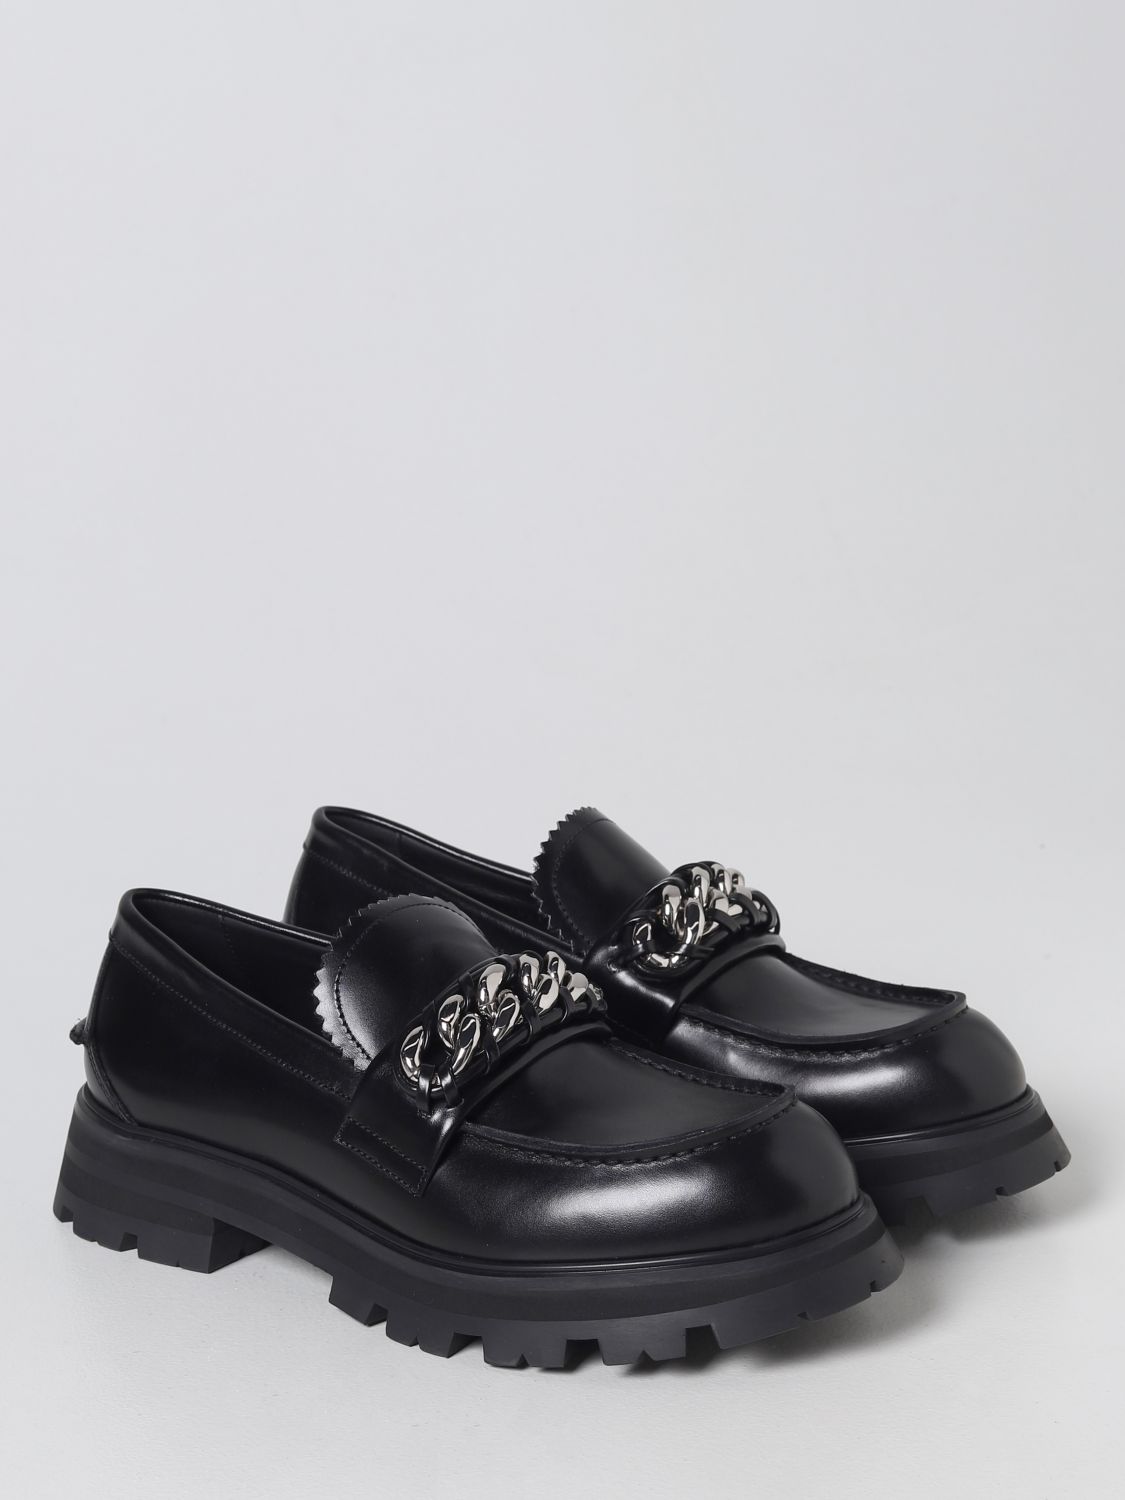 ALEXANDER loafer leather - Black | Alexander Mcqueen loafers 727821WHSWG on GIGLIO.COM